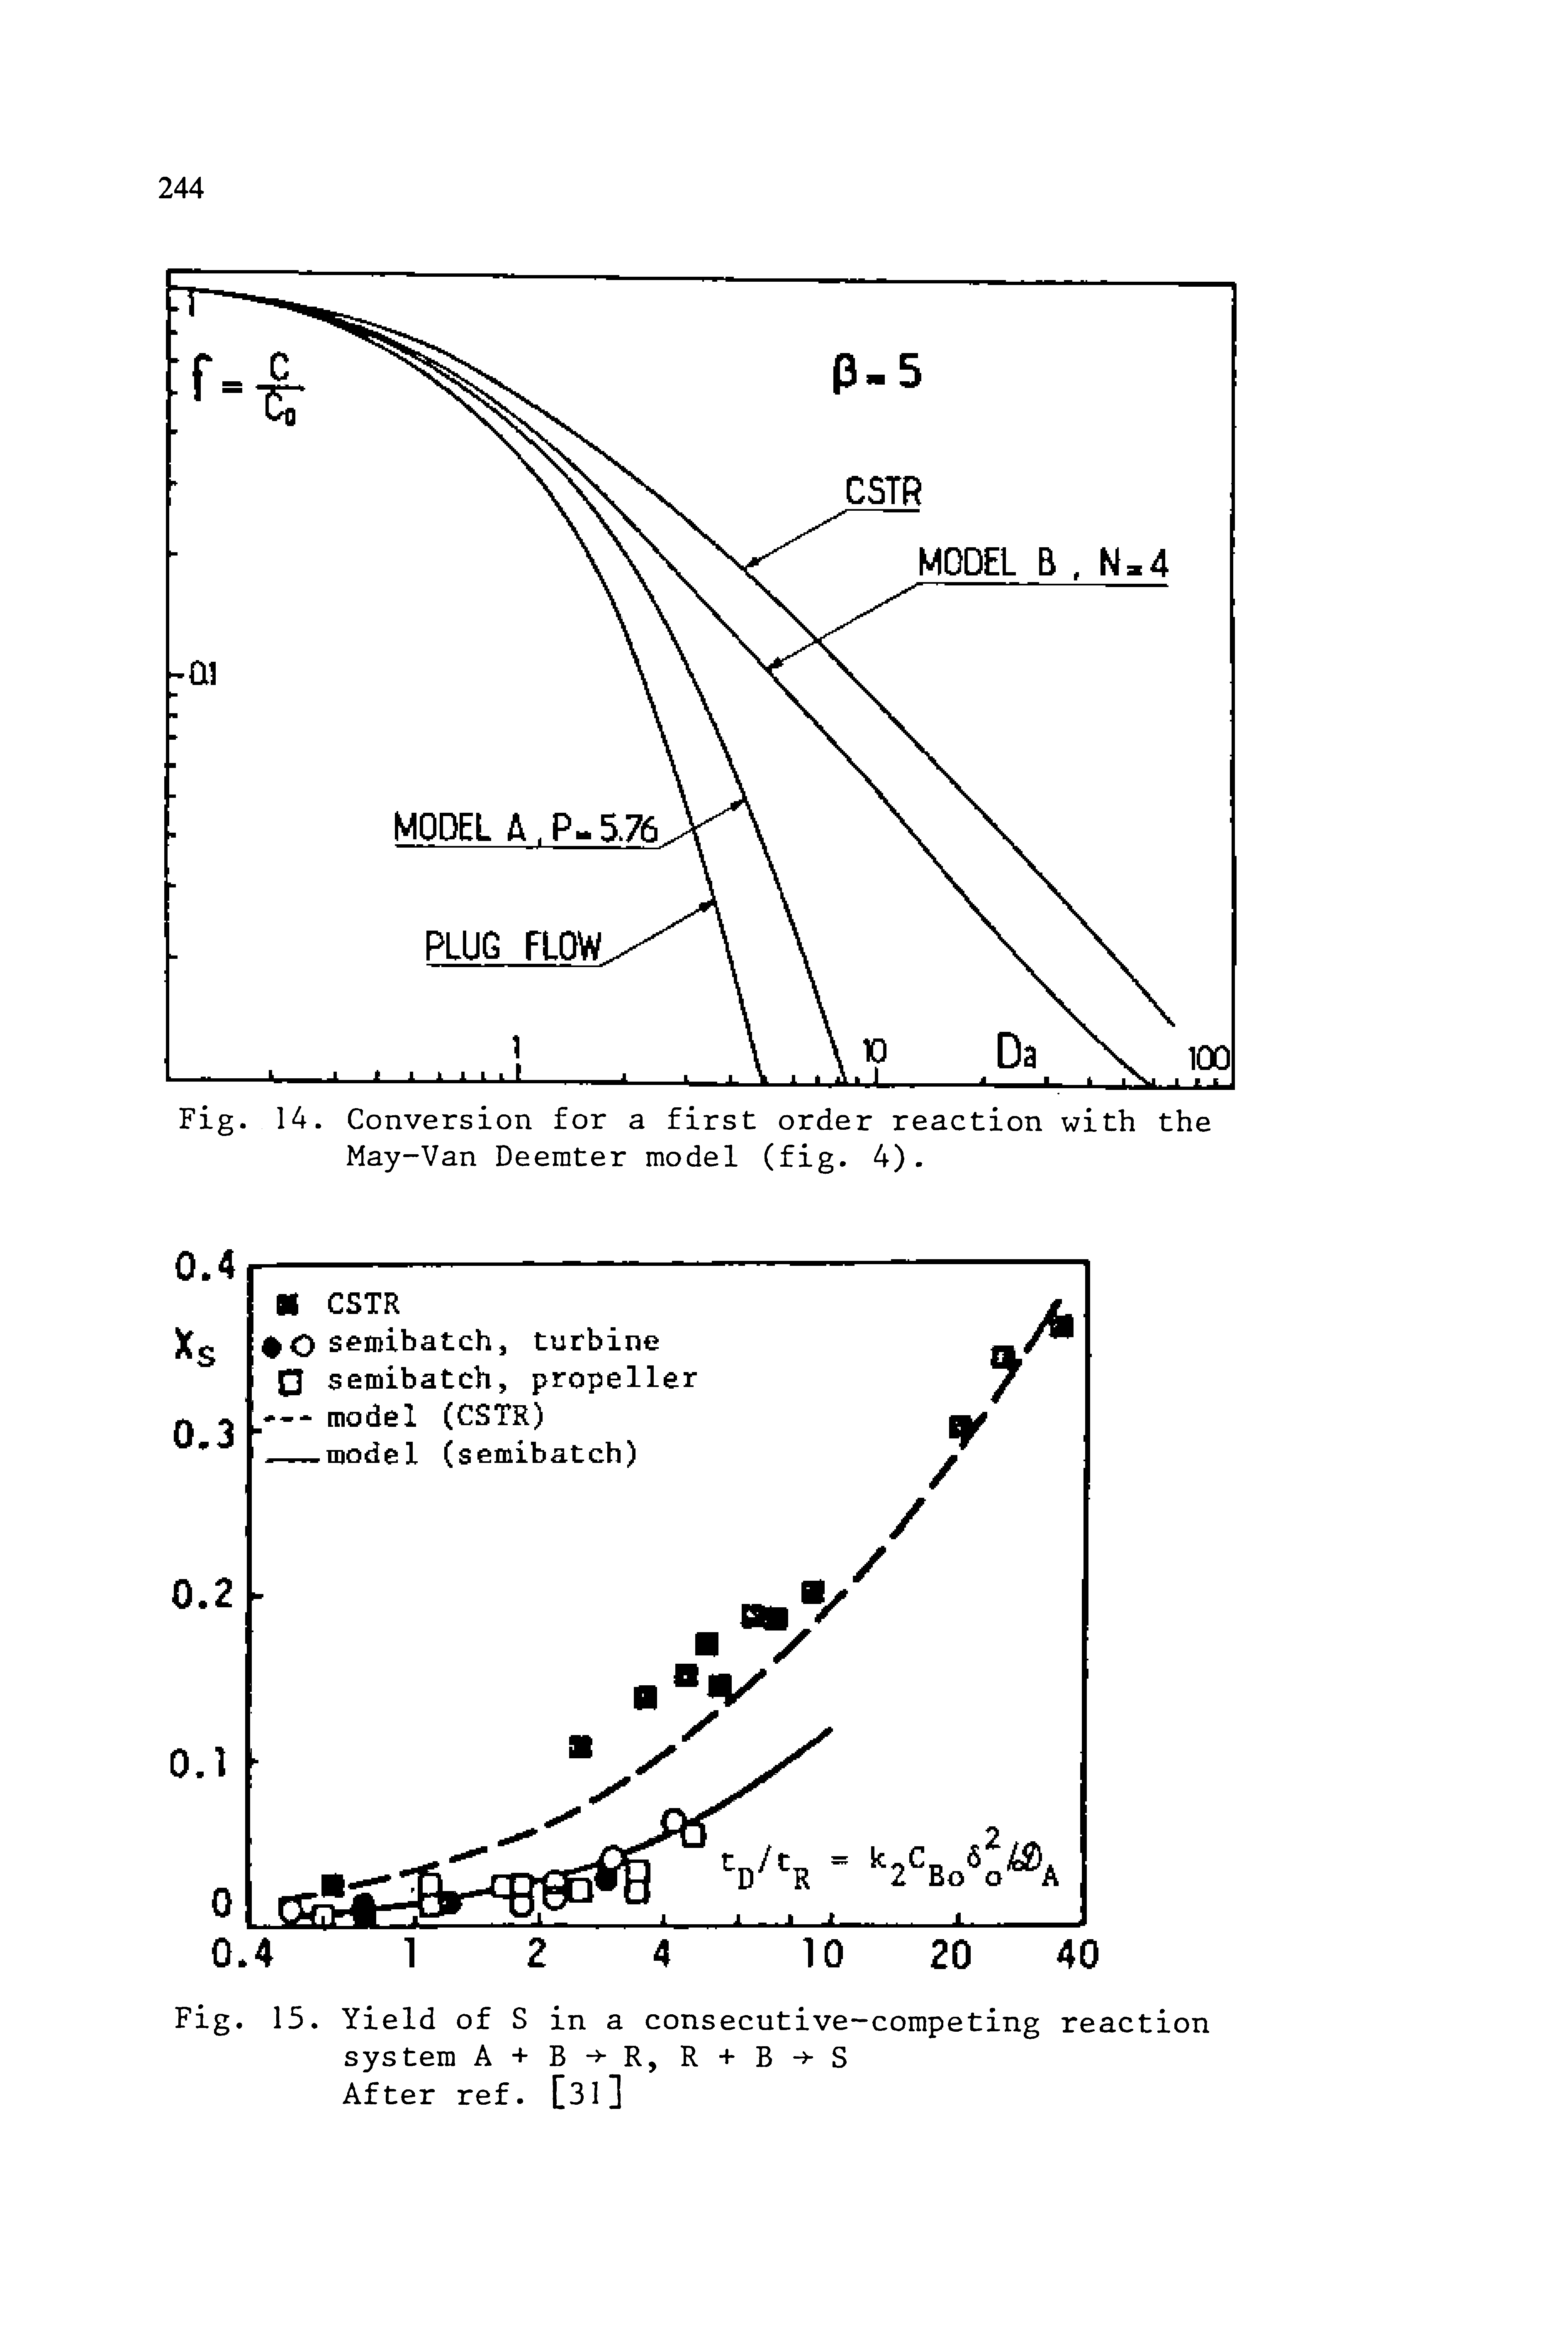 Fig. 14. Conversion for a first order reaction with the May-Van Deemter model (fig. 4).